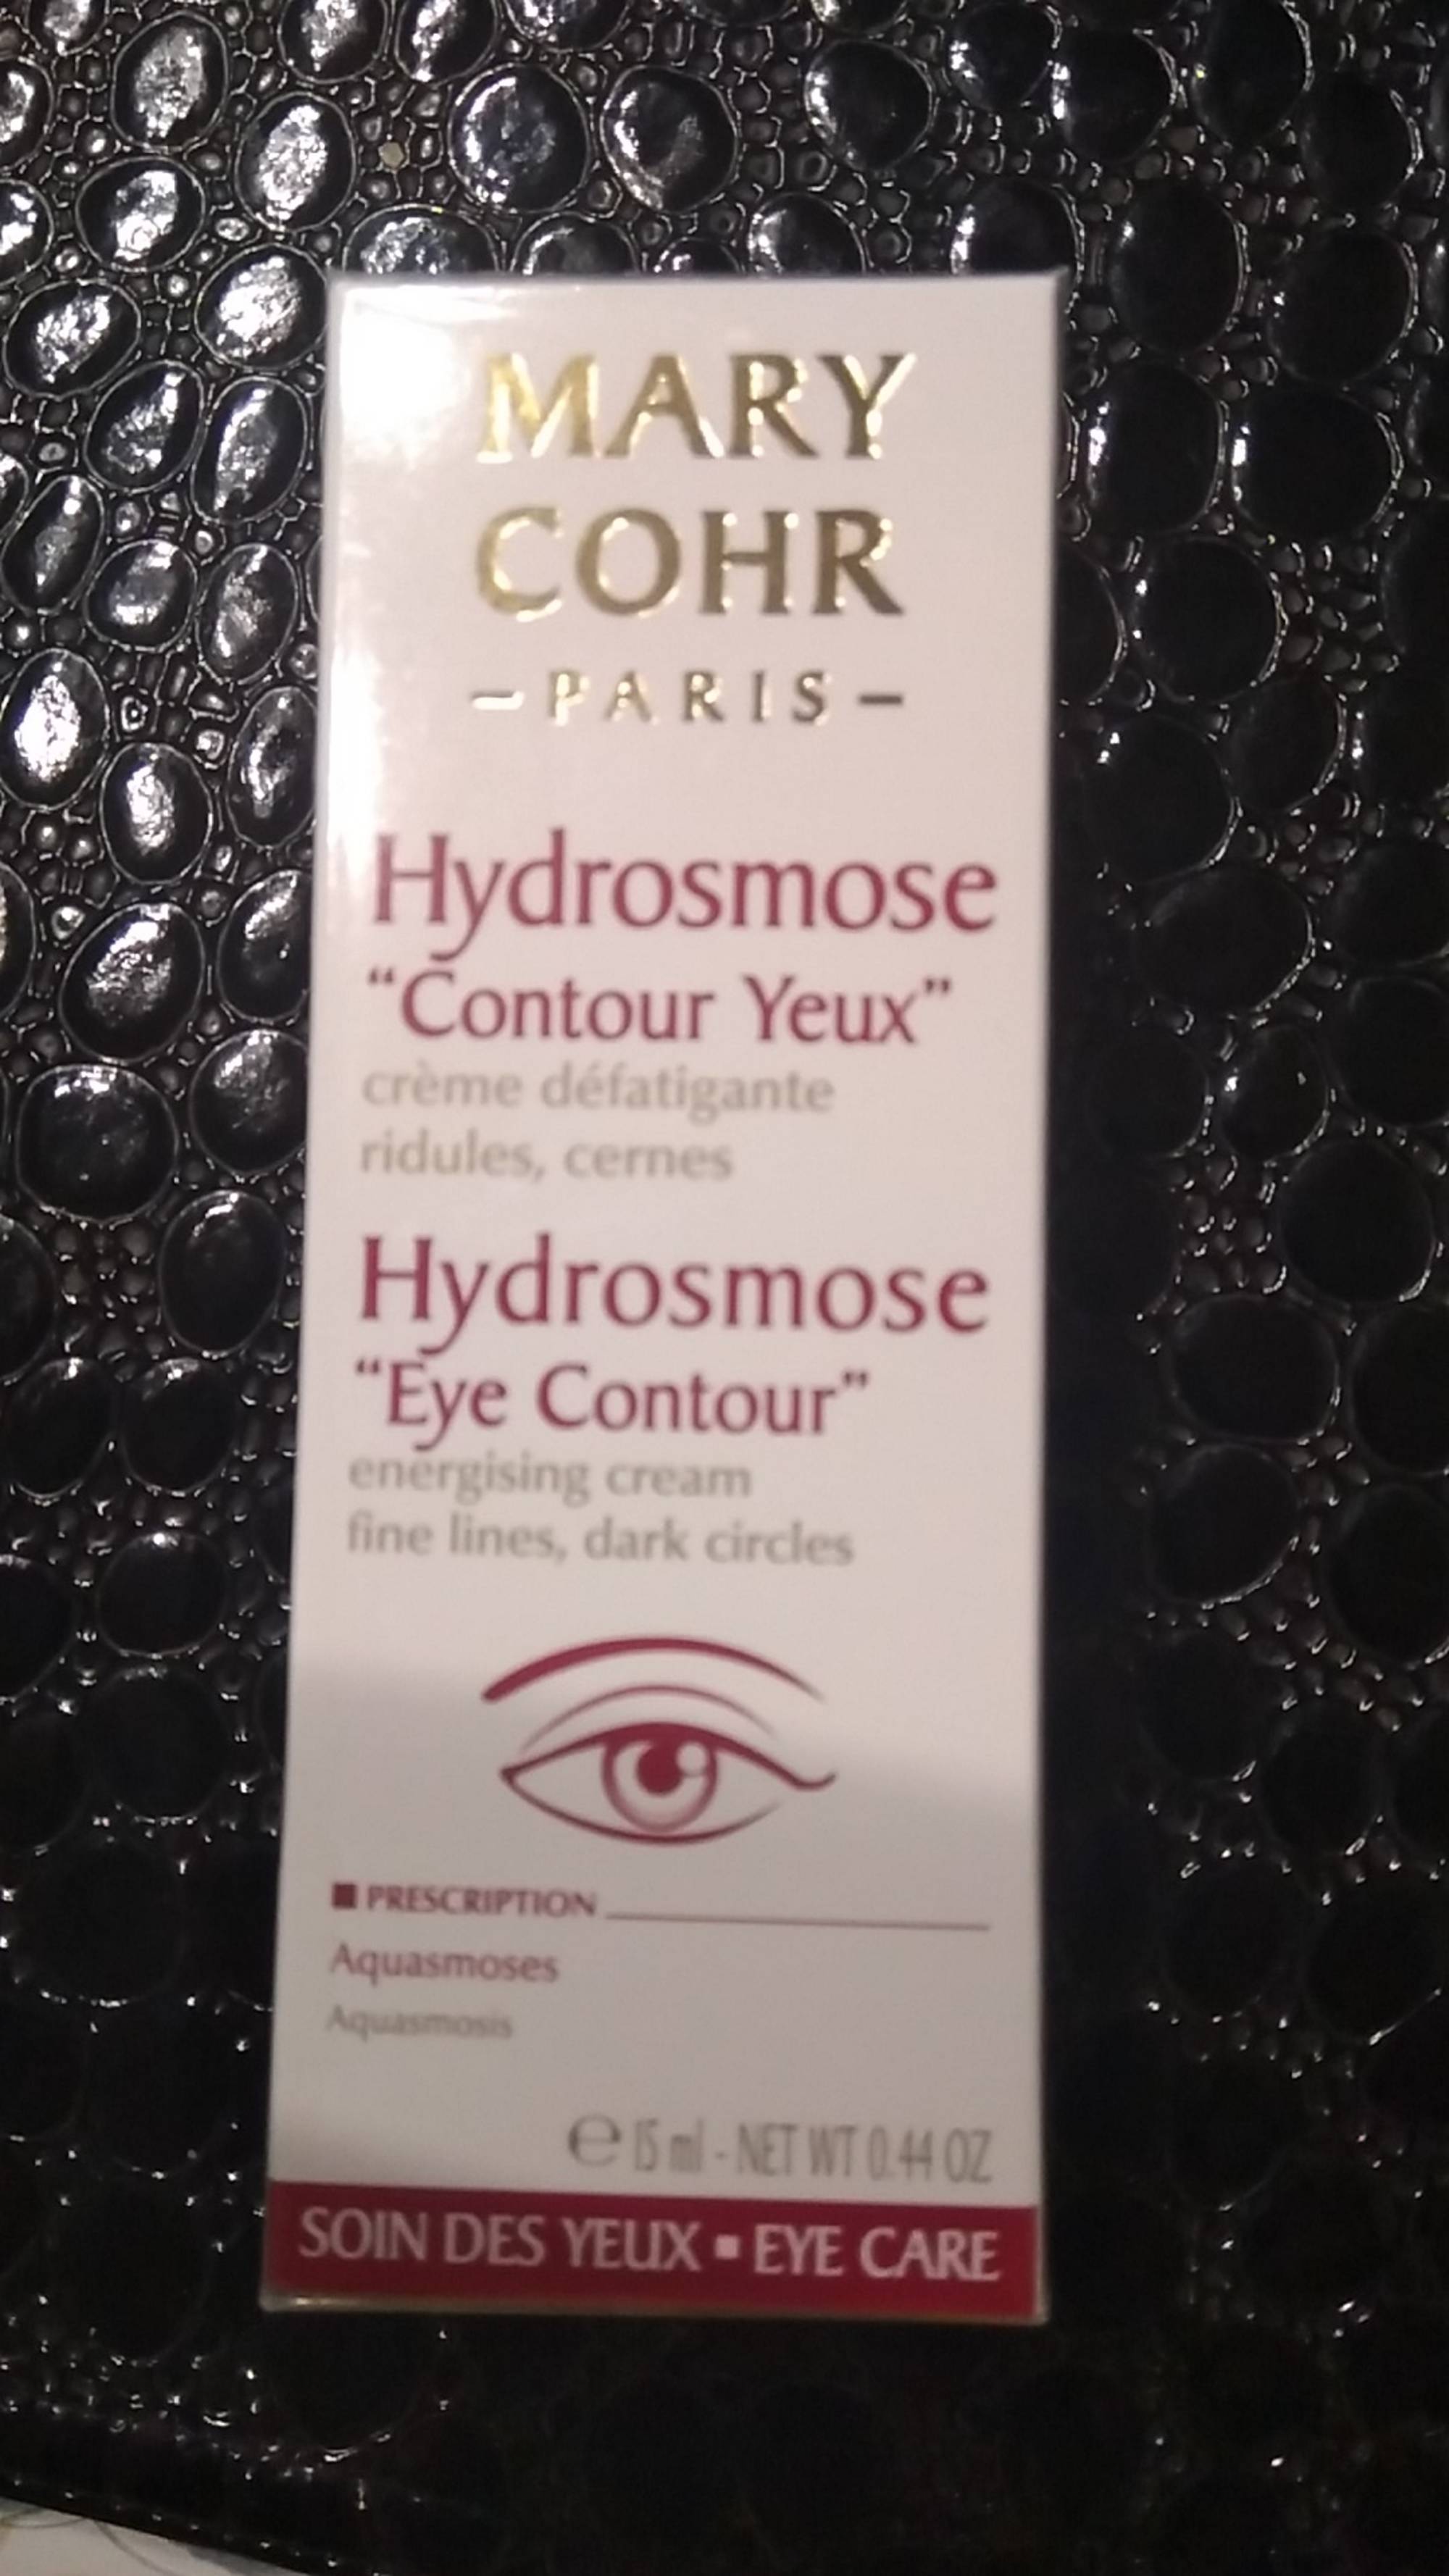 MARY COHR - Hydrosmose - Contour yeux